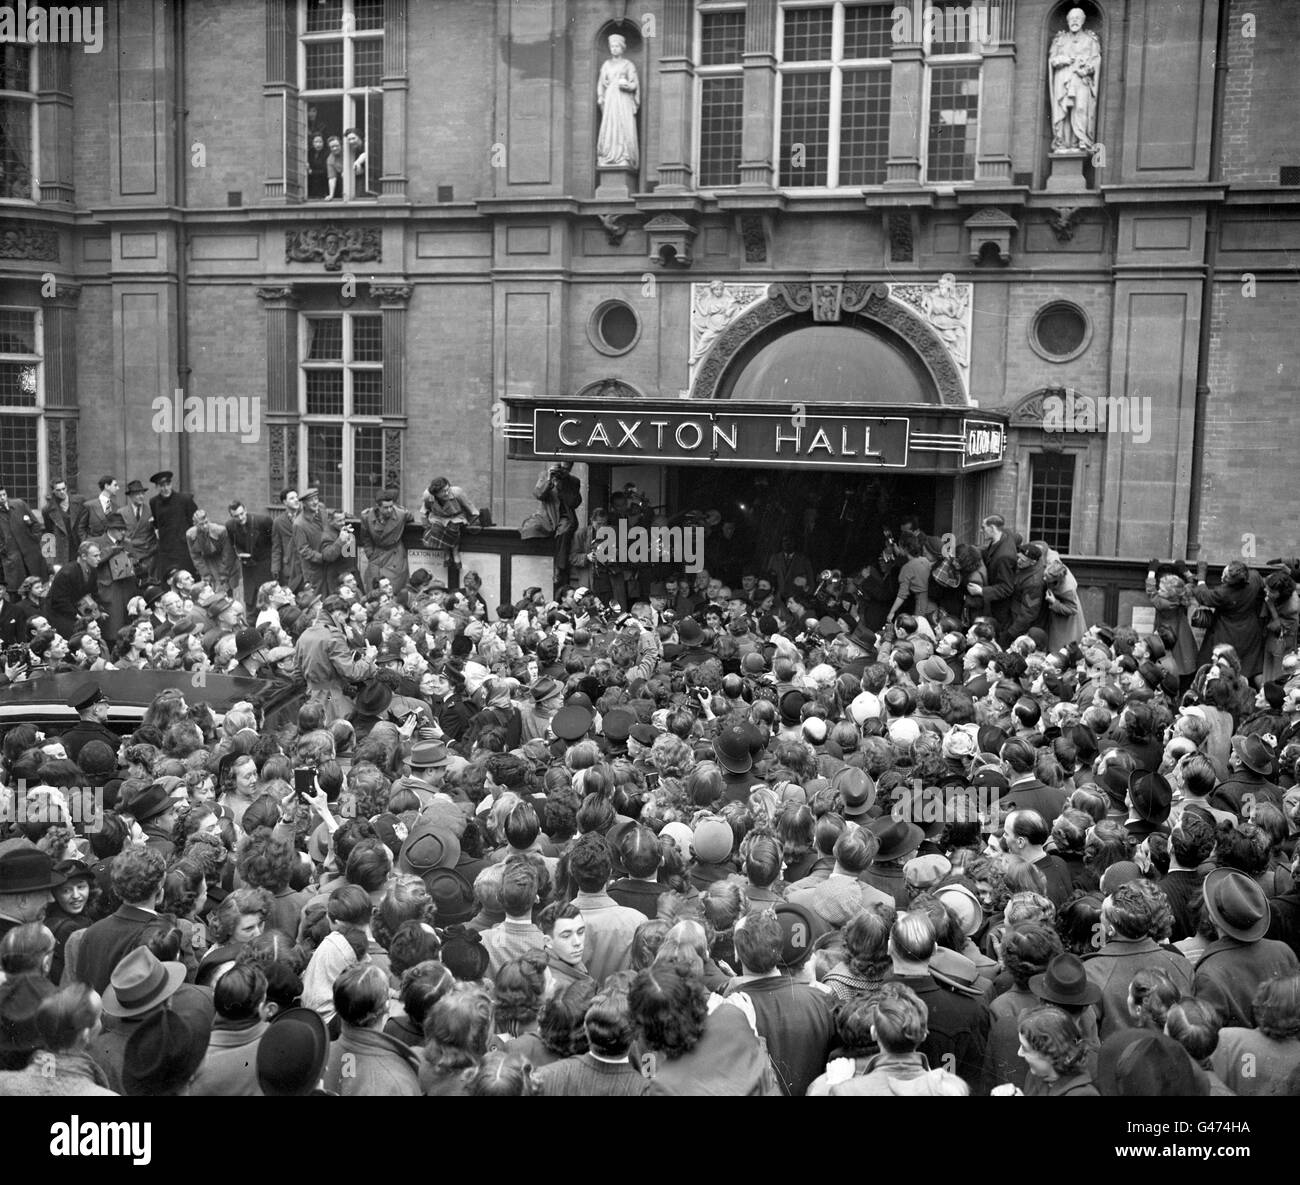 British-born actress Elizabeth Taylor marries British actor Michael Wilding at London's Caxton hall. The huge crowd mobs the happy couple after the ceremony. Stock Photo